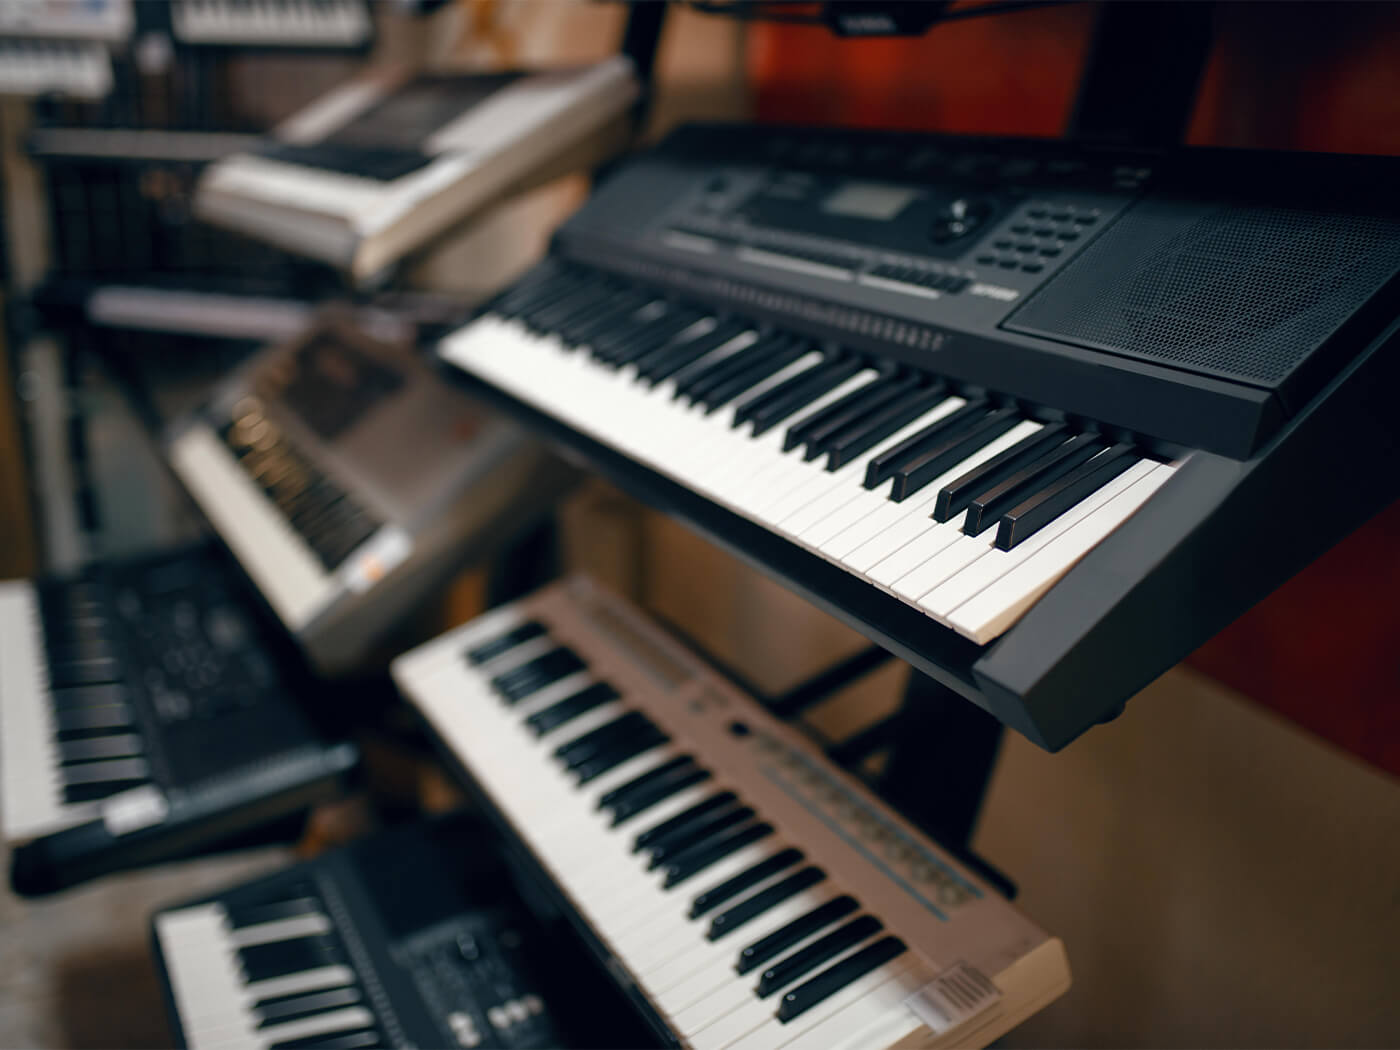 Synths in store display